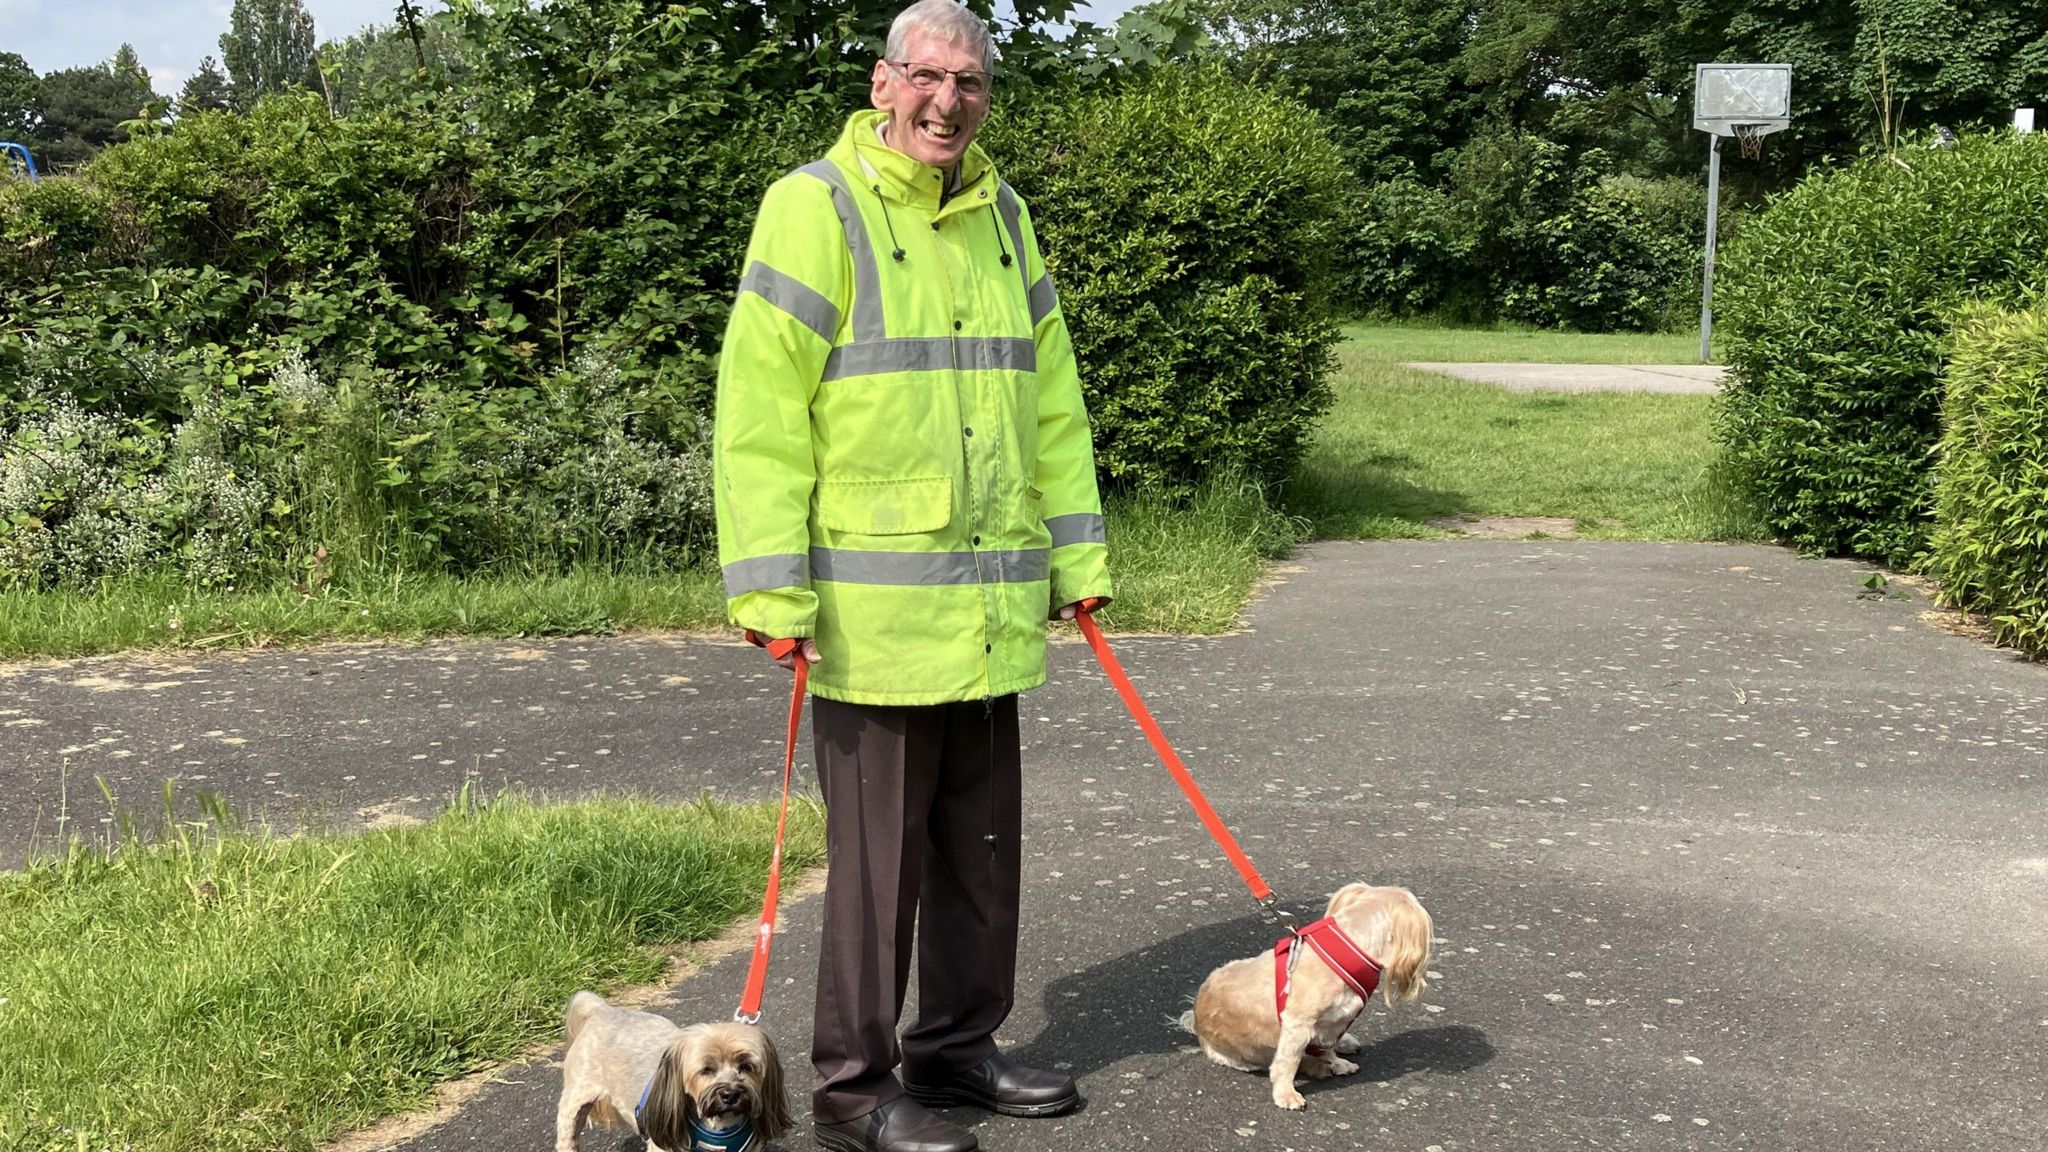 Dog owner wearing florescent yellow coat walking two small dogs on sturdy leads